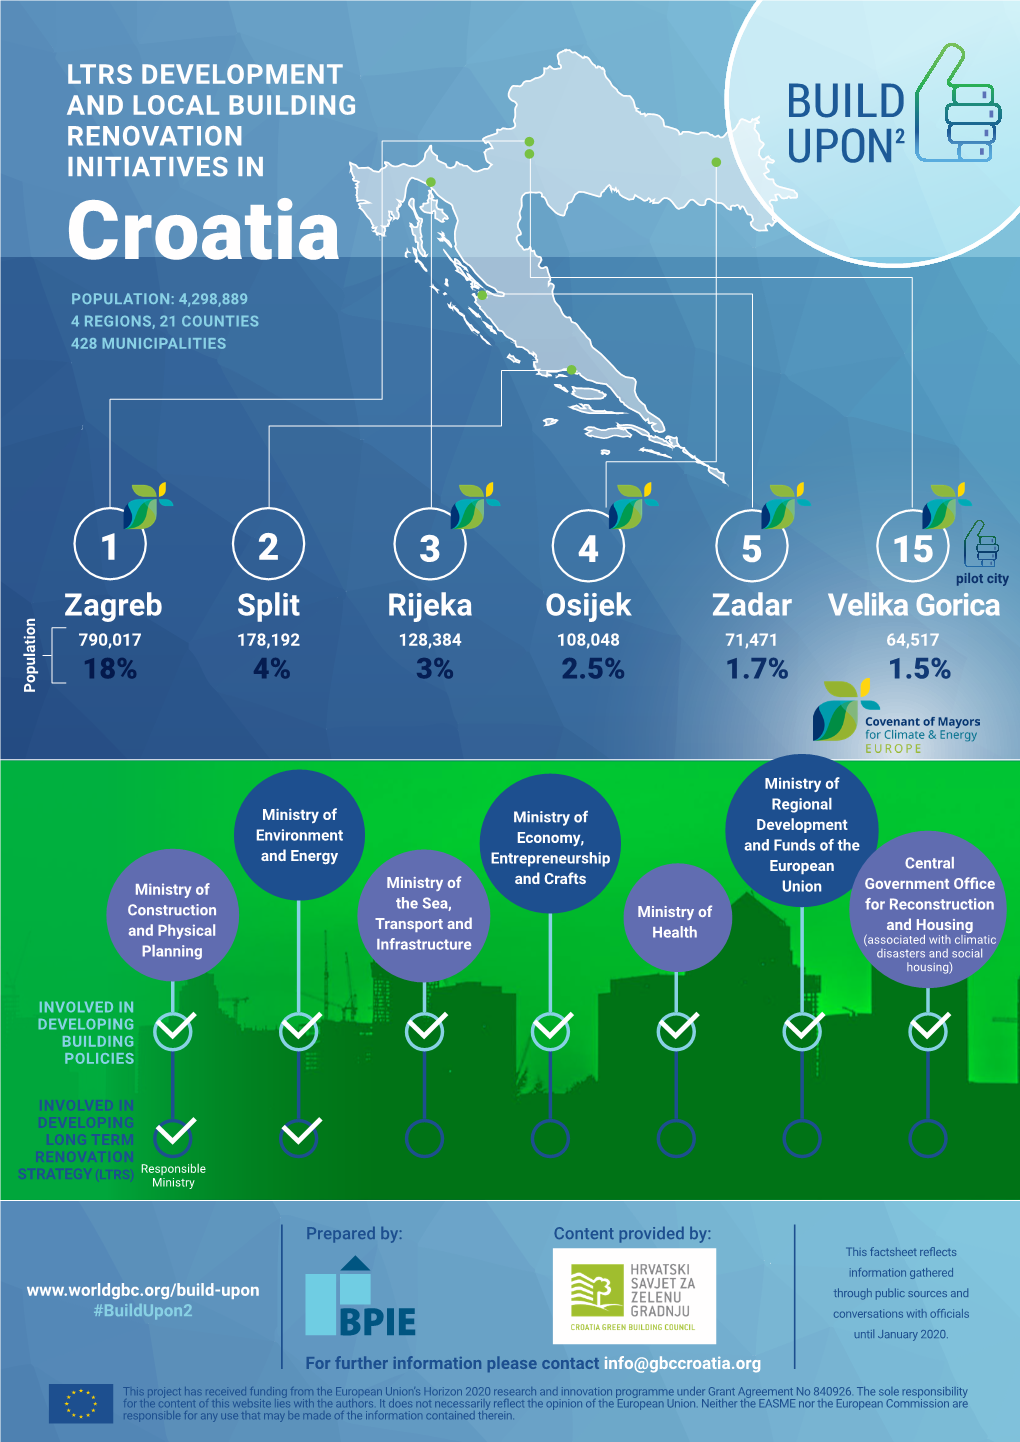 LTRS DEVELOPMENT and LOCAL BUILDING RENOVATION INITIATIVES in Croatia POPULATION: 4,298,889 4 REGIONS, 21 COUNTIES 428 MUNICIPALITIES